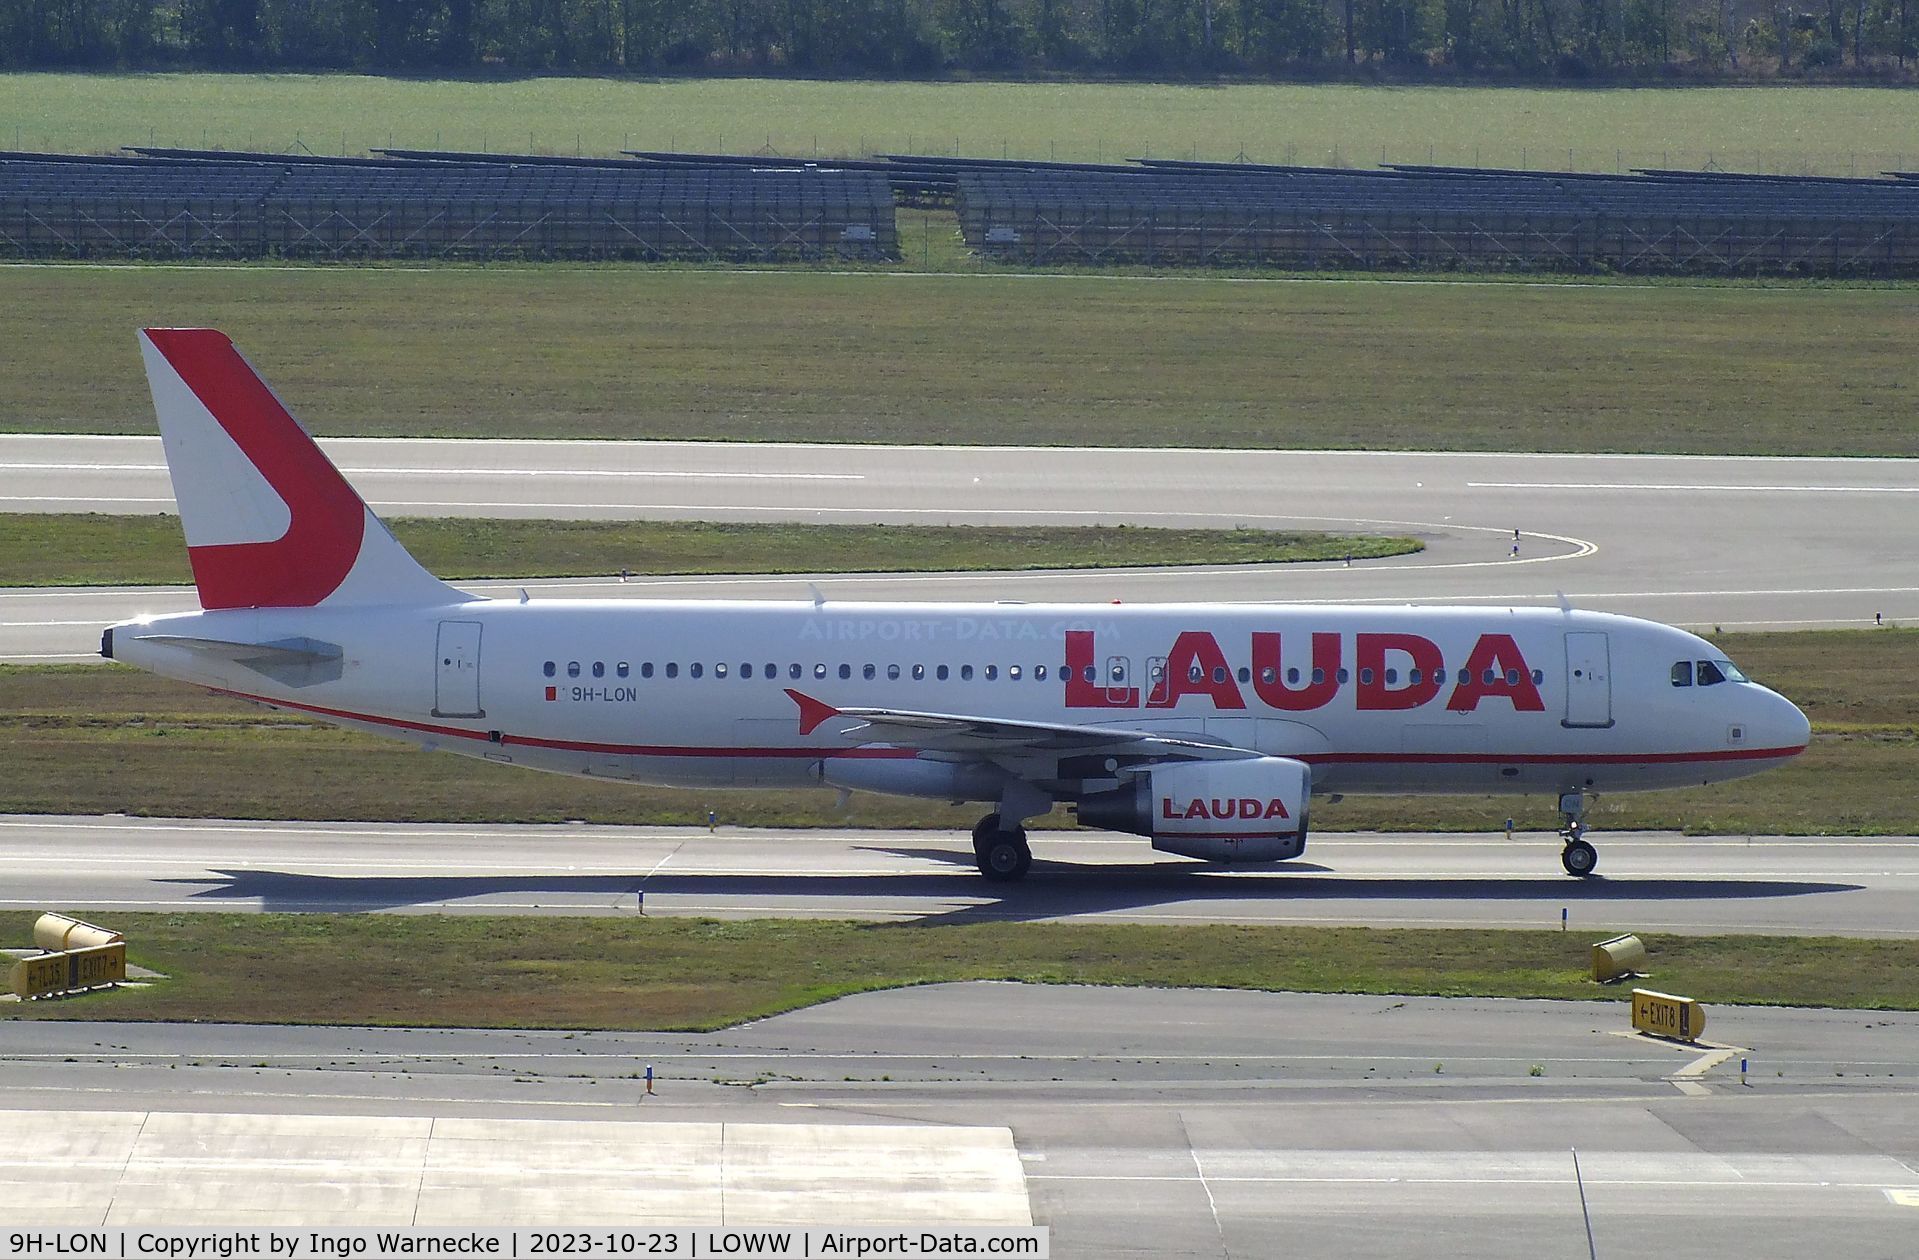 9H-LON, 2007 Airbus A320-214 C/N 3048, Airbus A320-214 of Lauda Europe at Wien-Schwechat airport